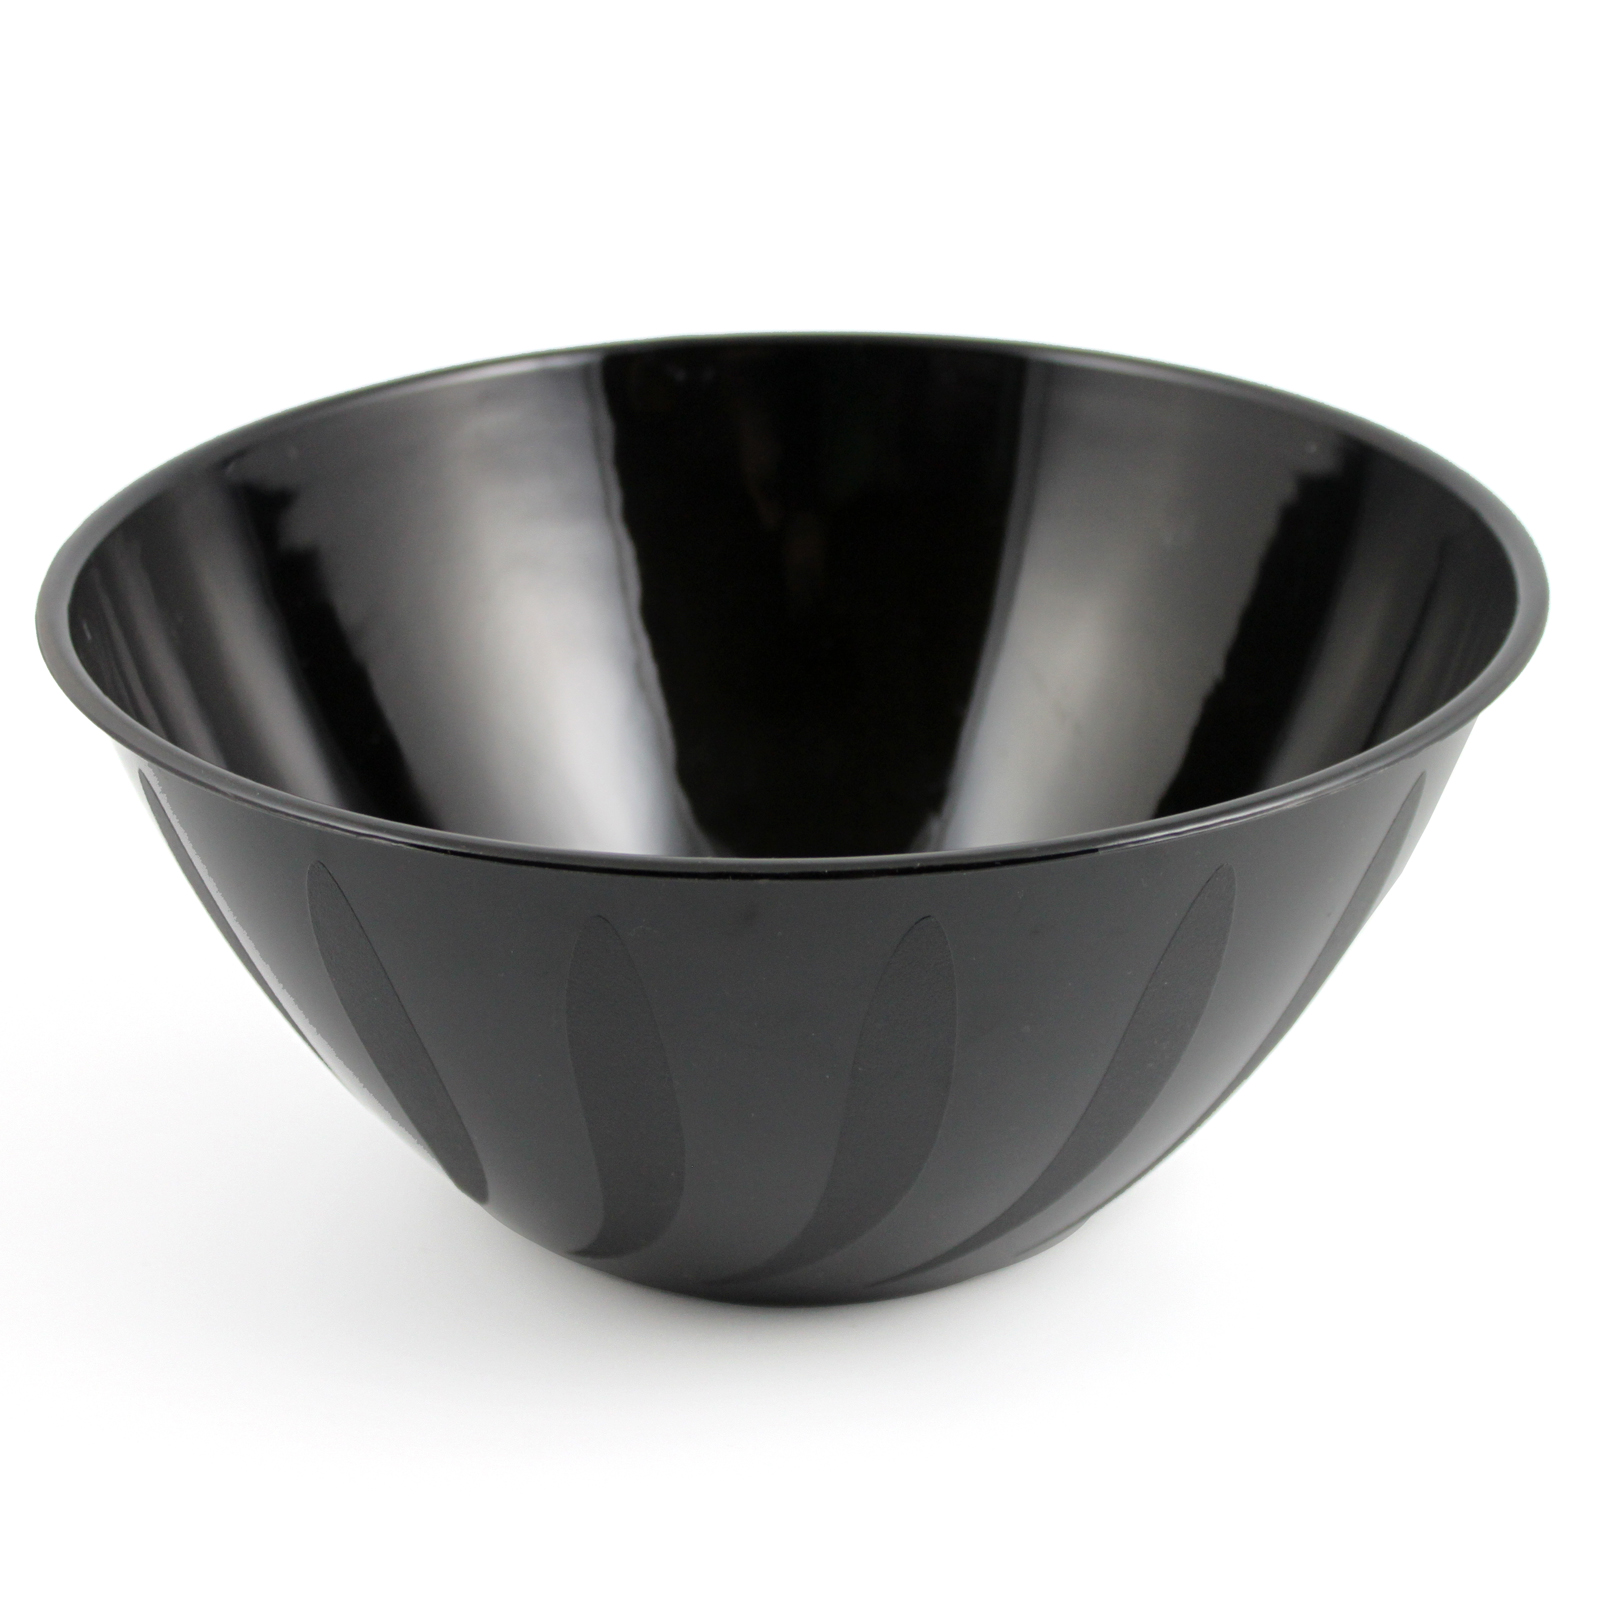 Cupping bowls